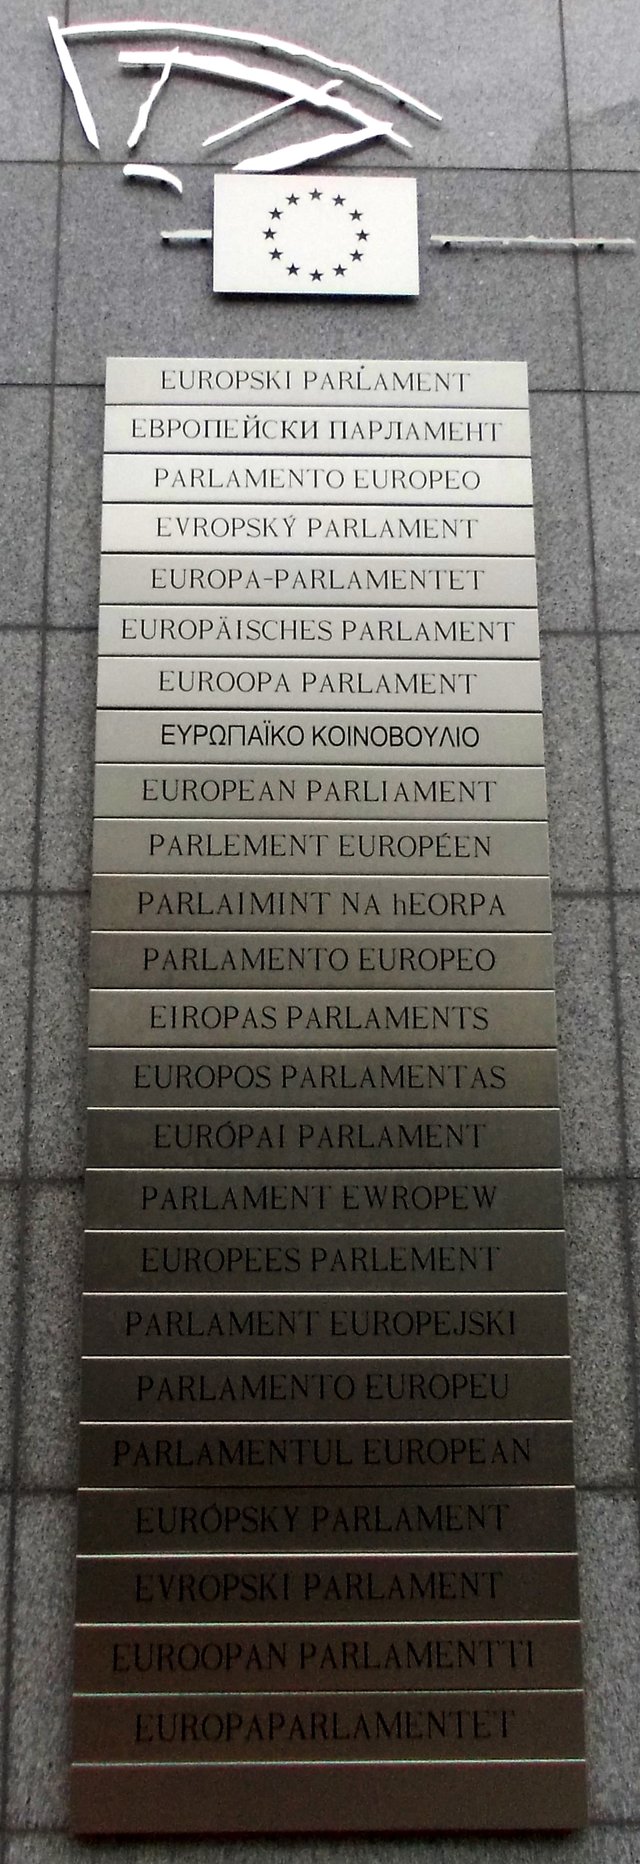 ‘European Parliament’ in official languages of the European Union (on the Parliament building in Brussels)